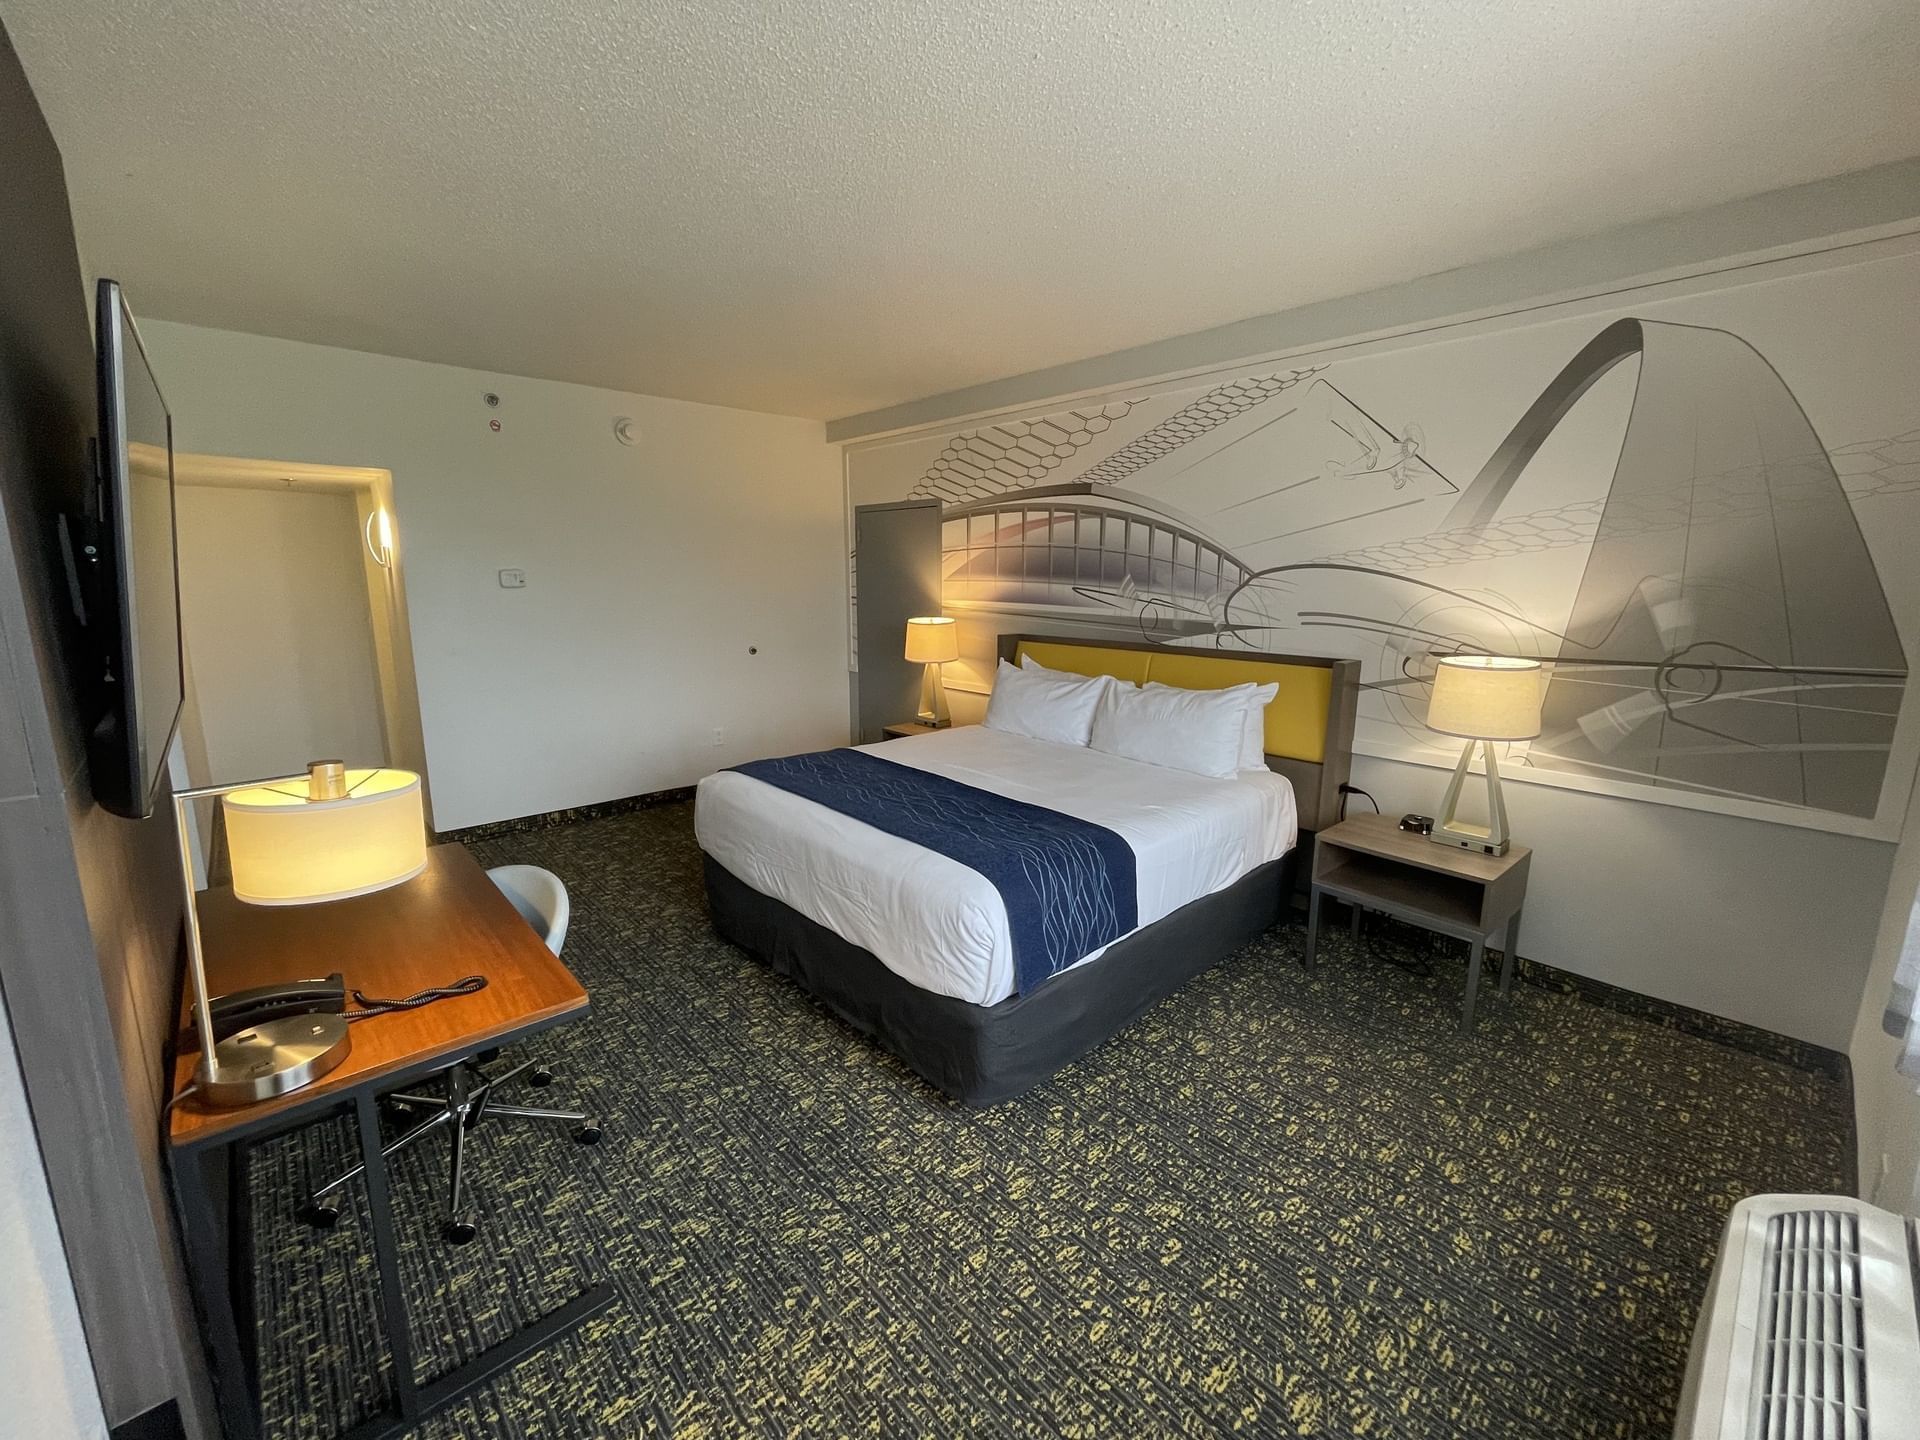 King bed, nightstand & working table with TV in King Executive Suite at St. Louis Airport Hotel